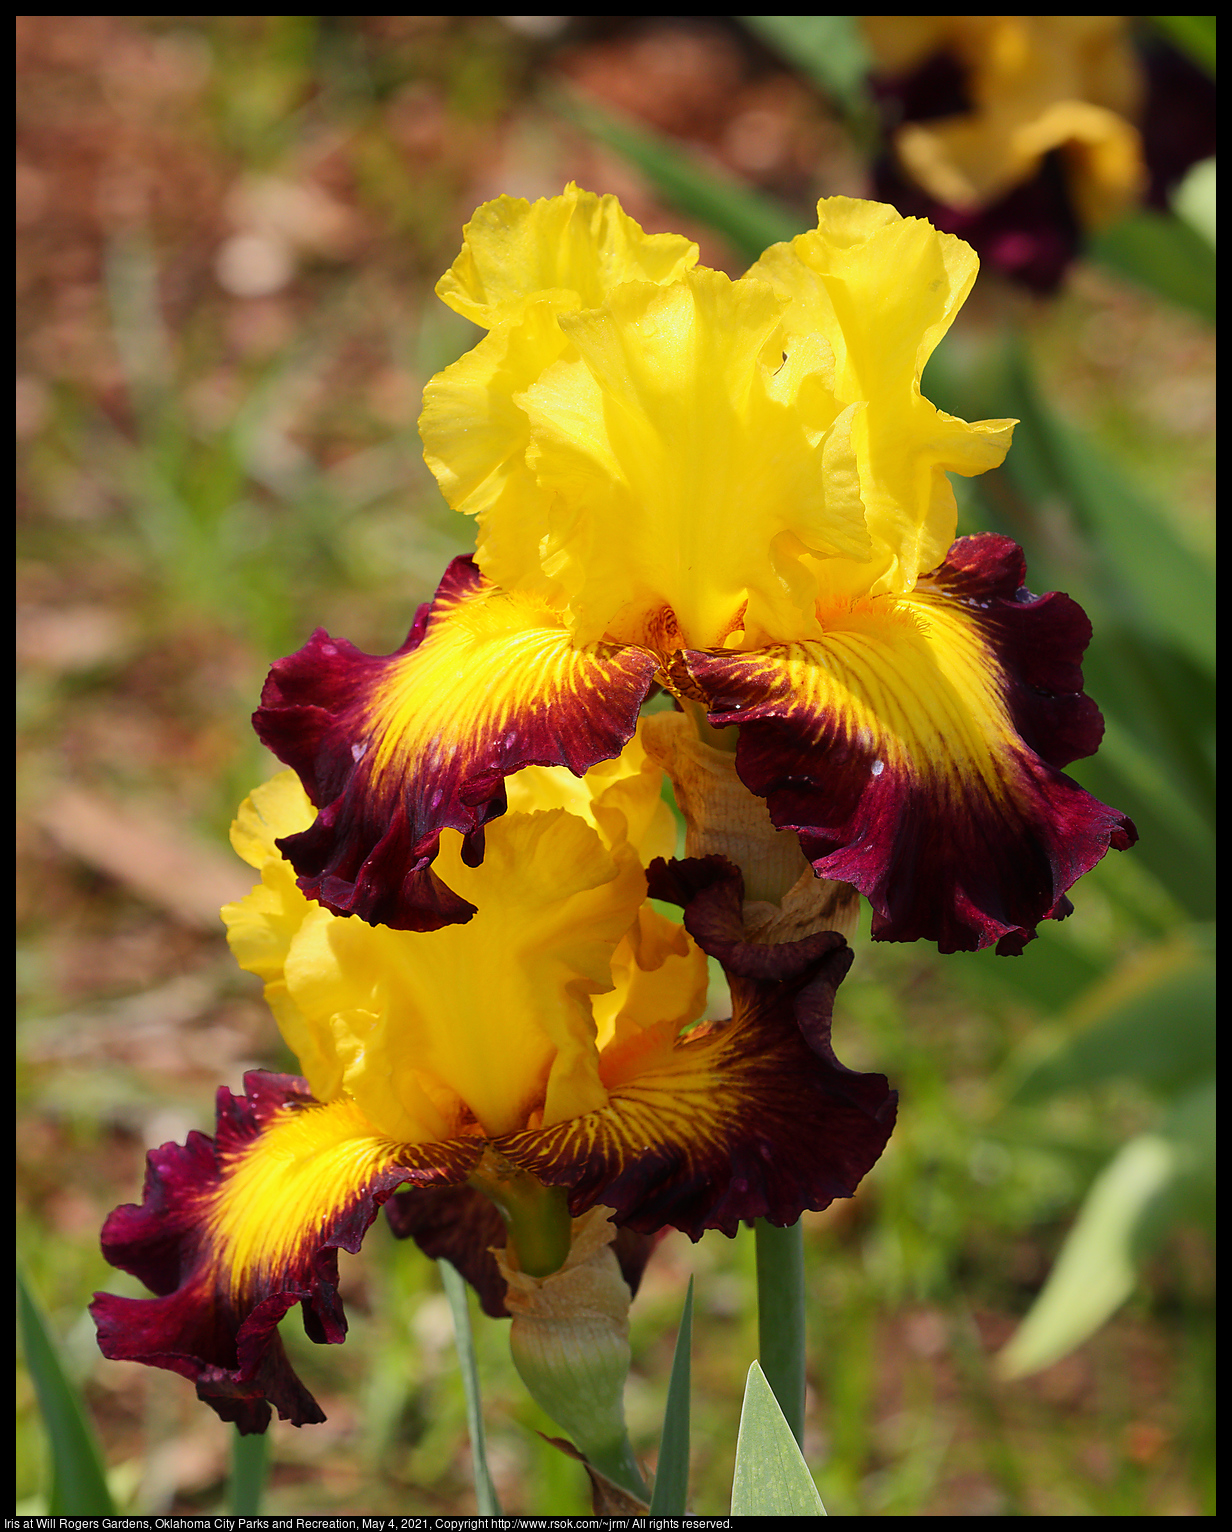 Iris at Will Rogers Gardens, Oklahoma City Parks and Recreation, May 4, 2021